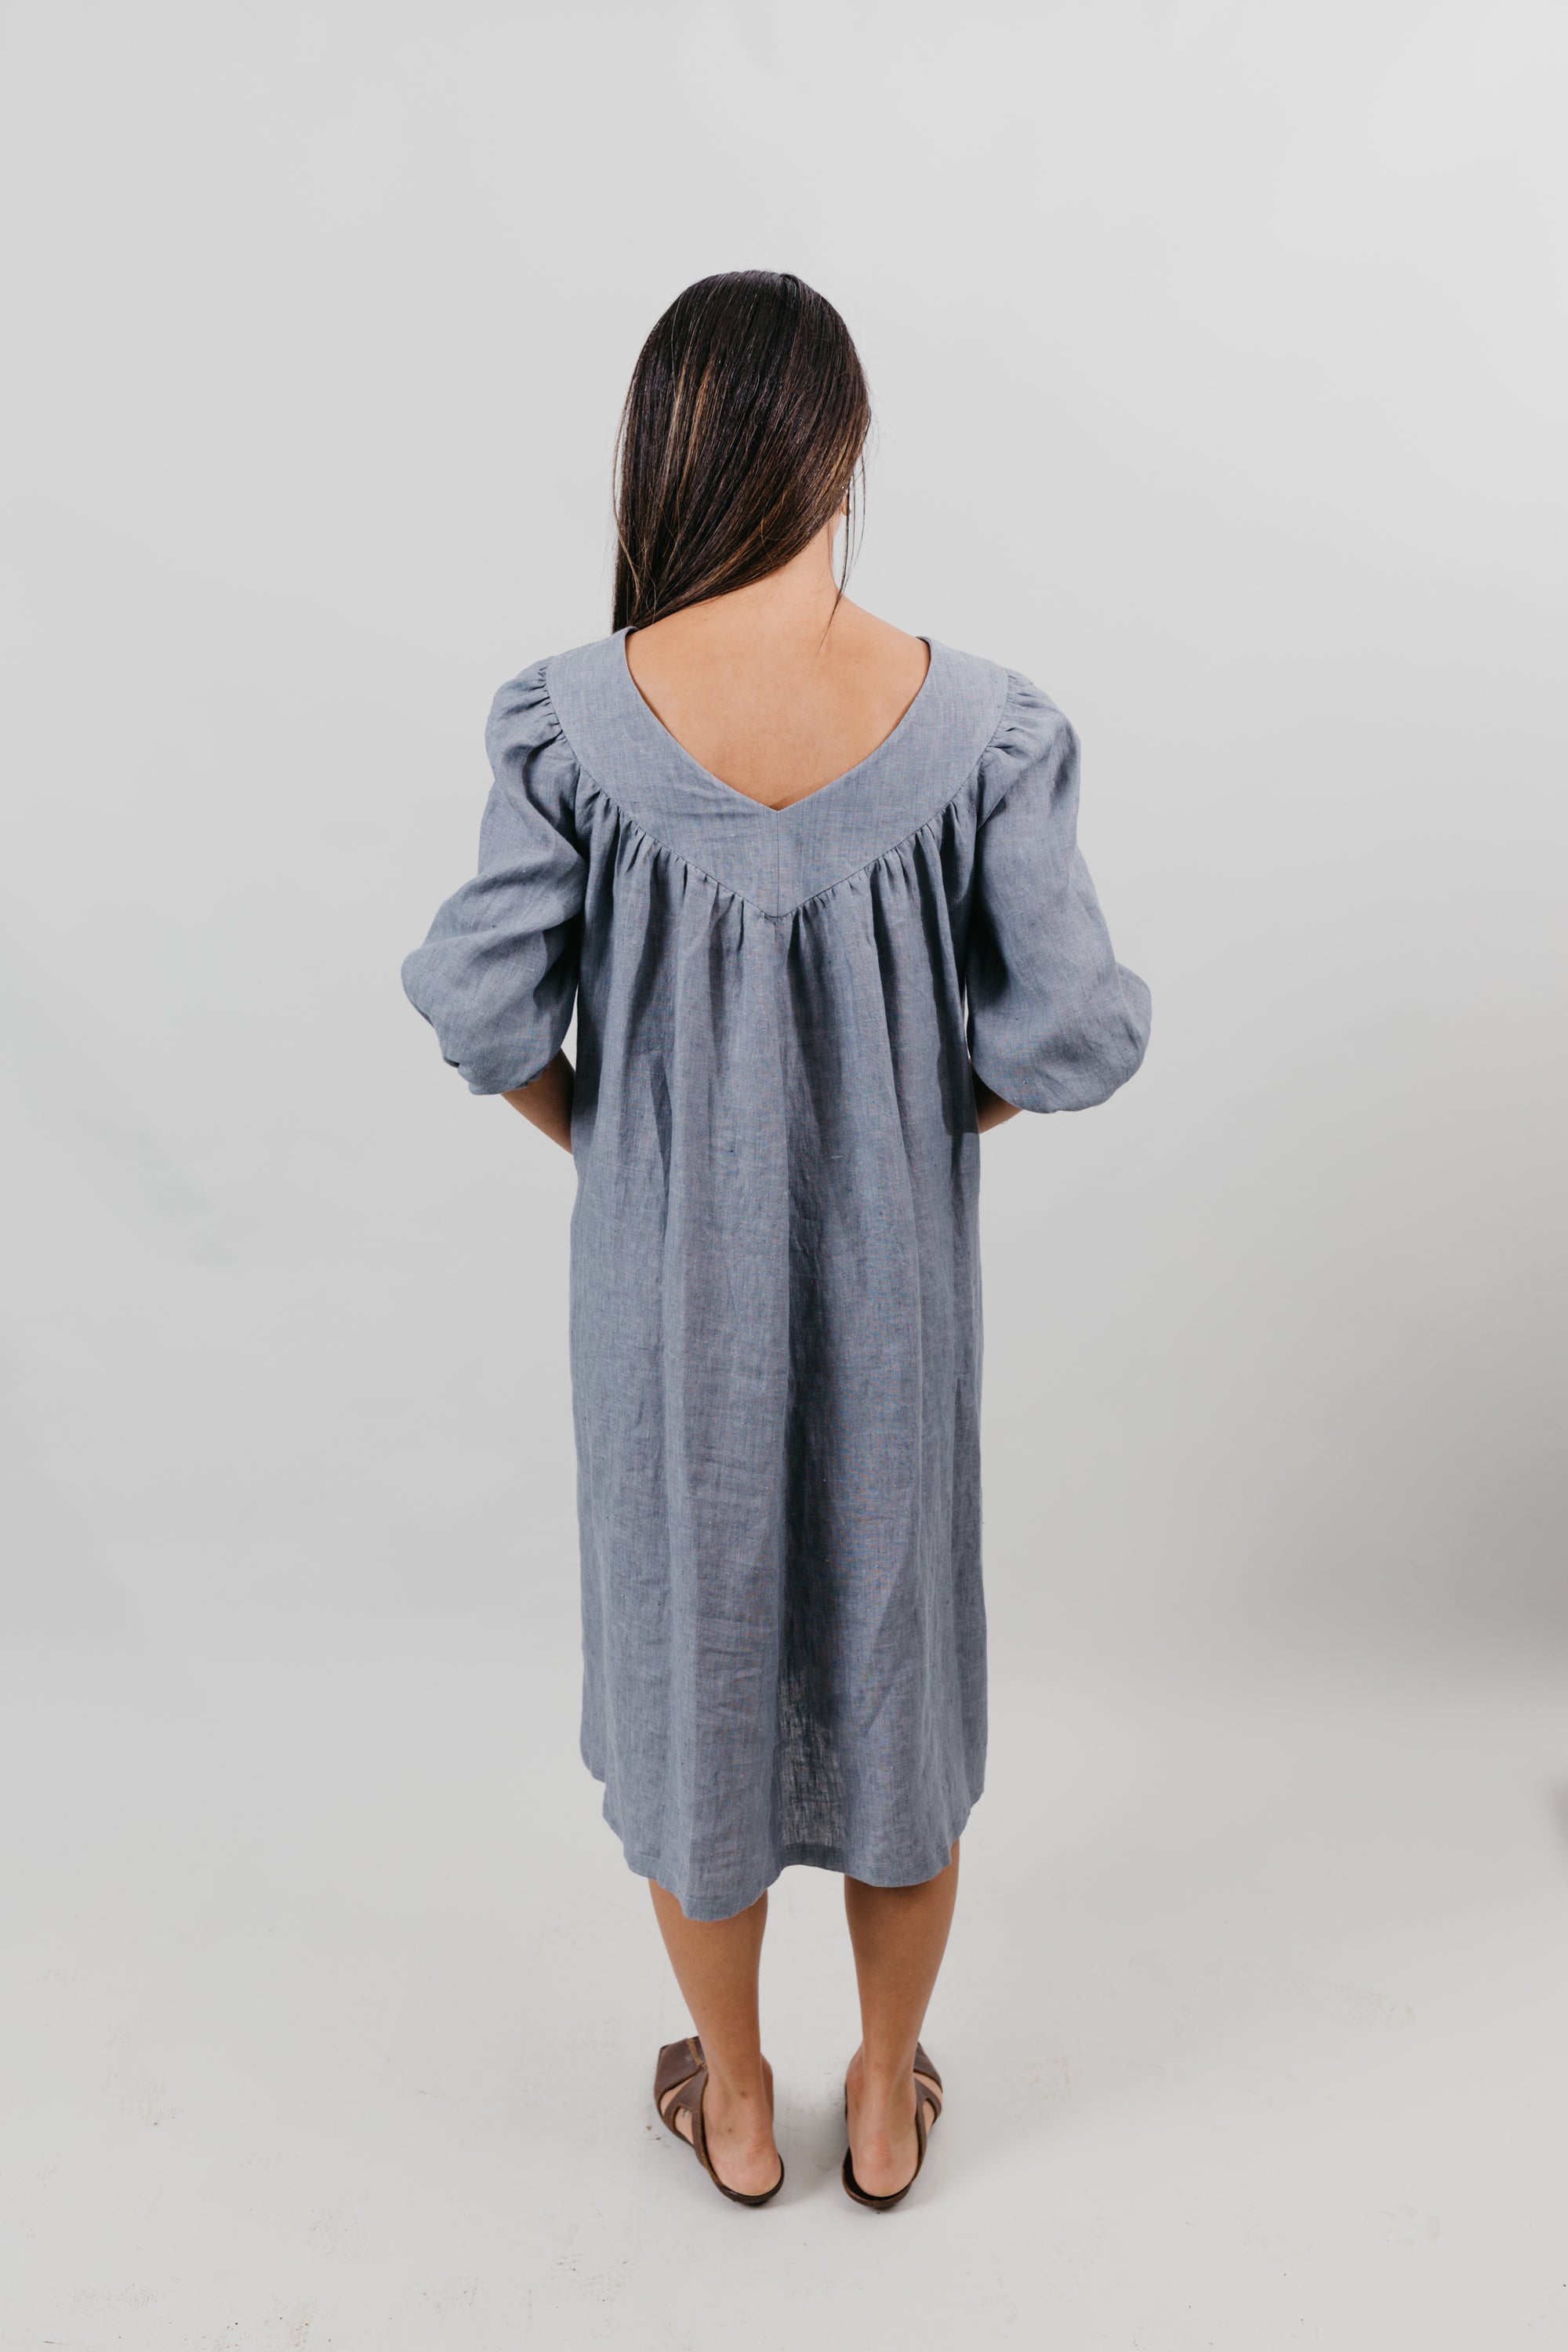 Back view of woman wearing a grey linen muumuu with 3/4 length sleeves.  Background is white backdrop.